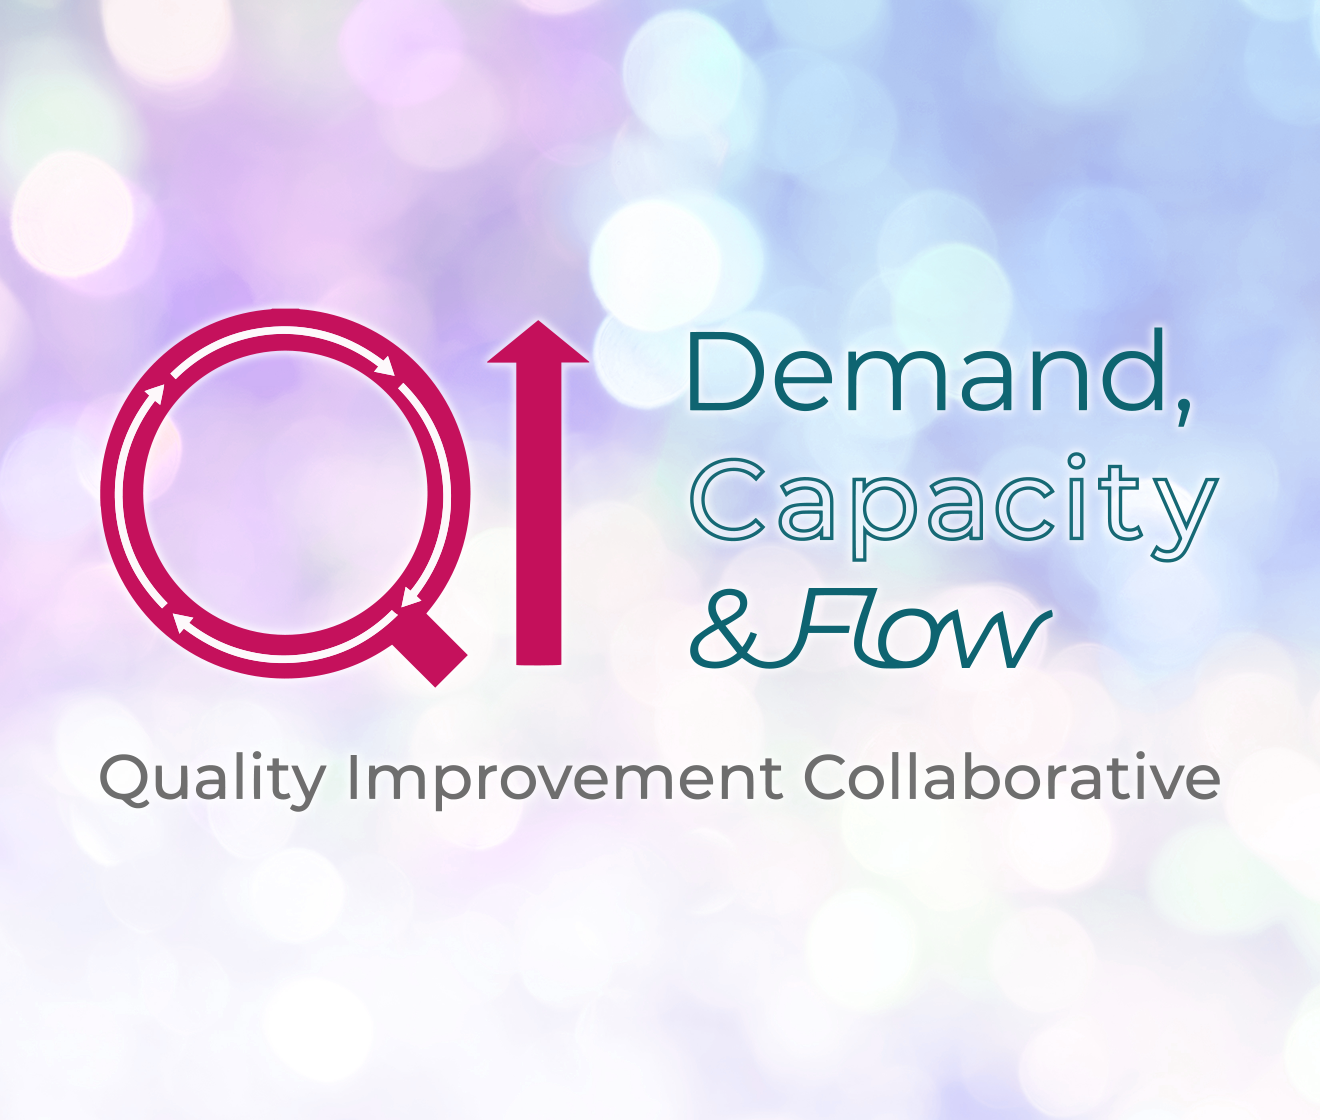 Demand, Capacity and Flow collaborative